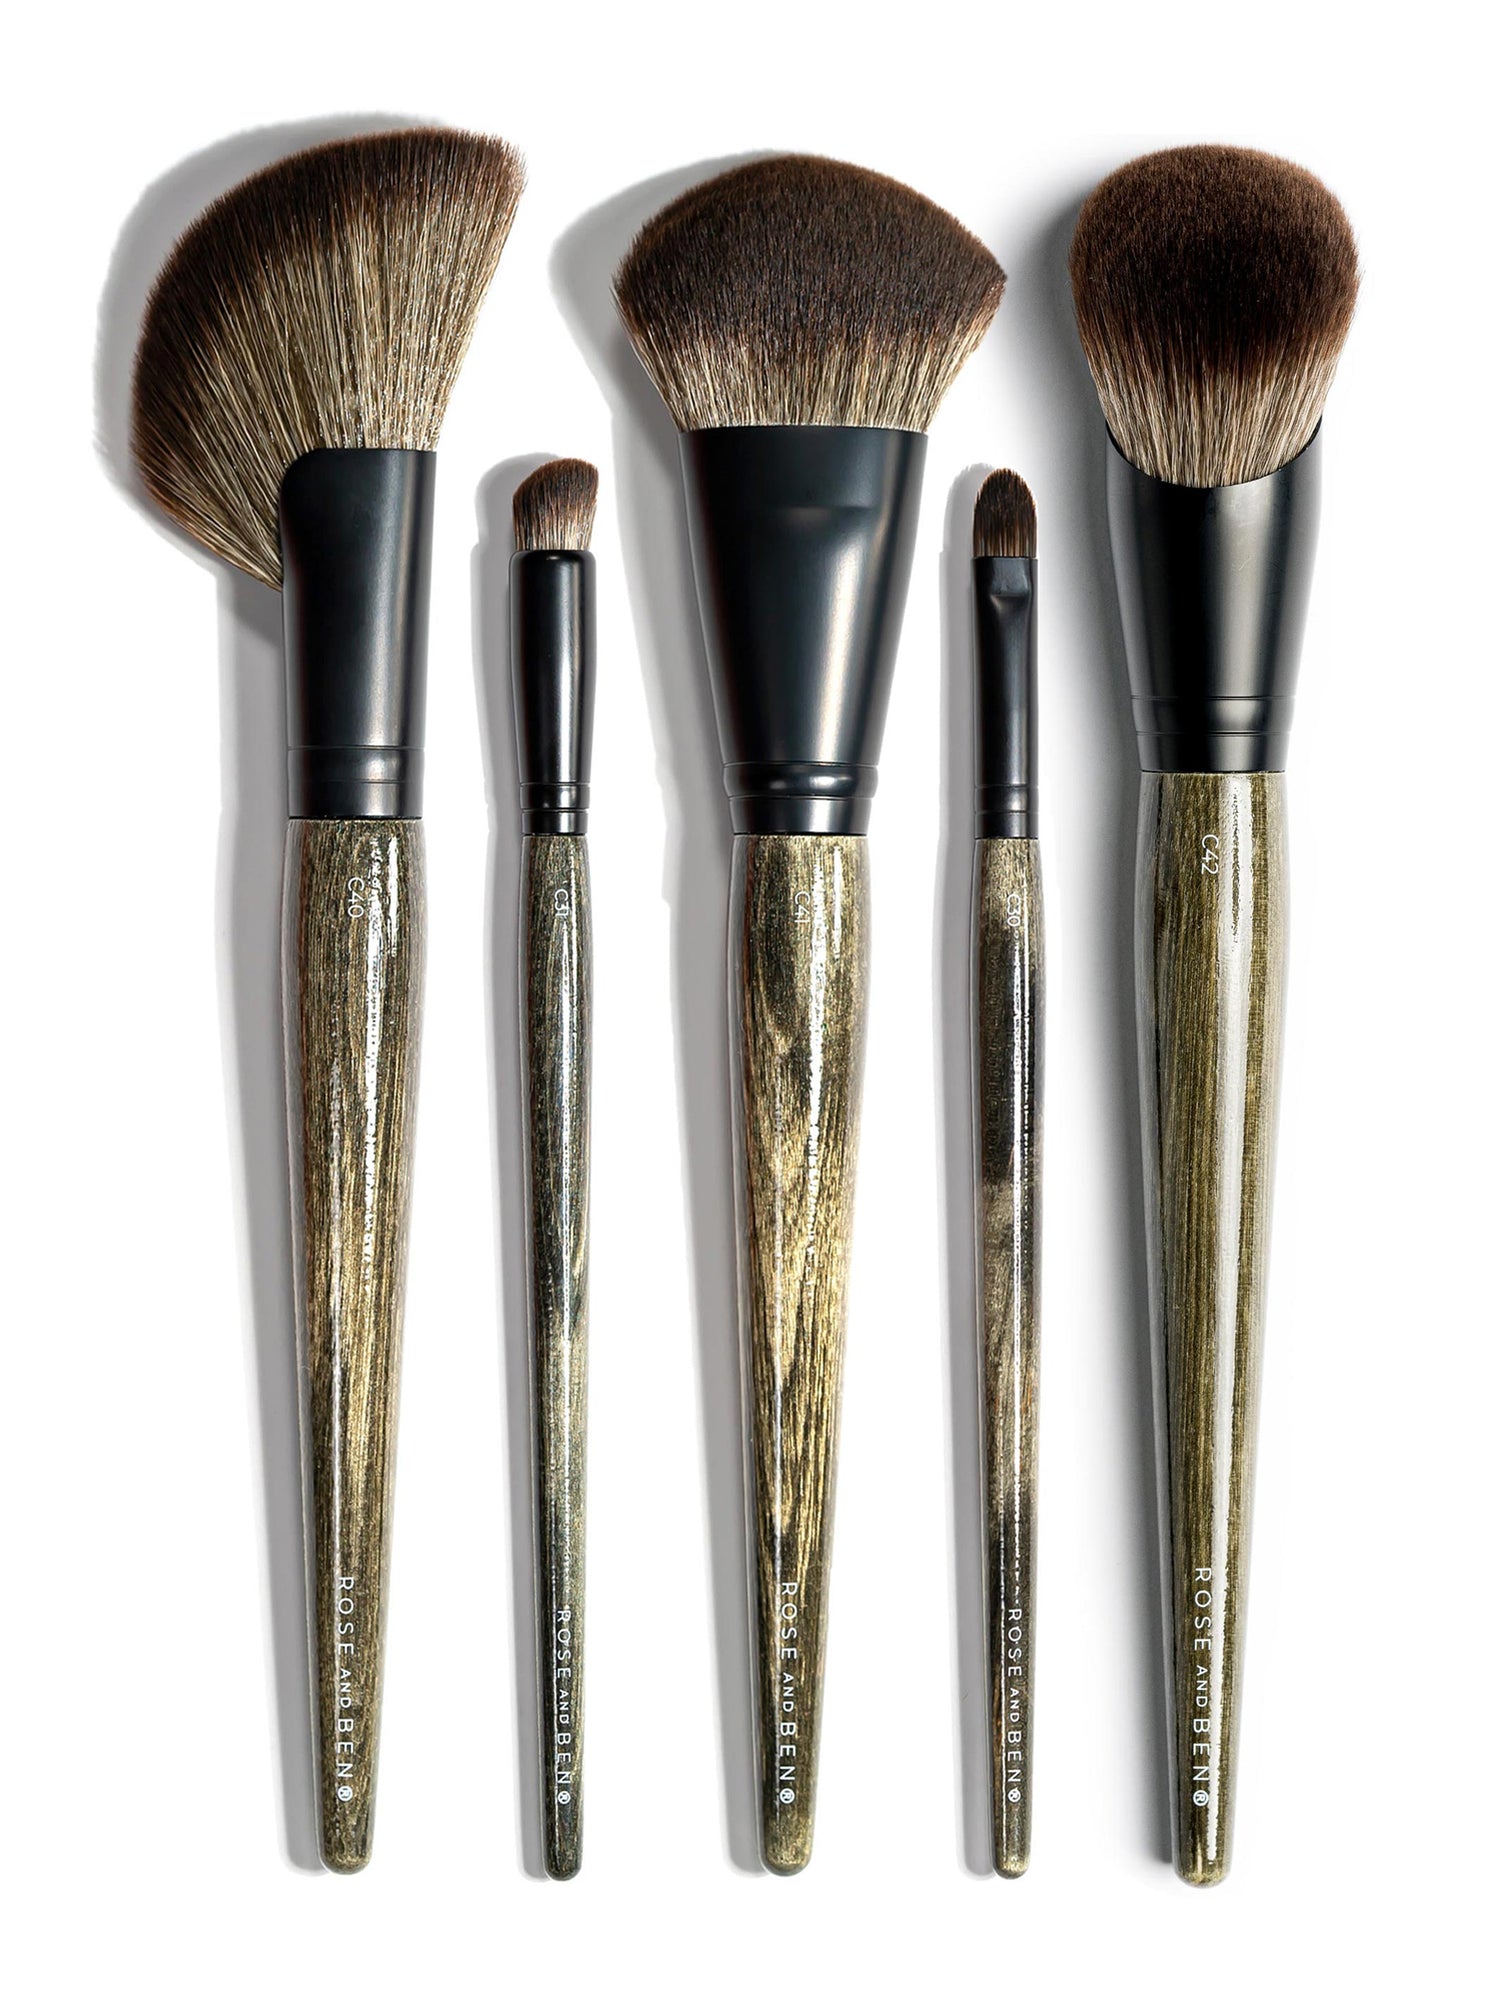 Rose and Ben Beauty Complexion Brush Set